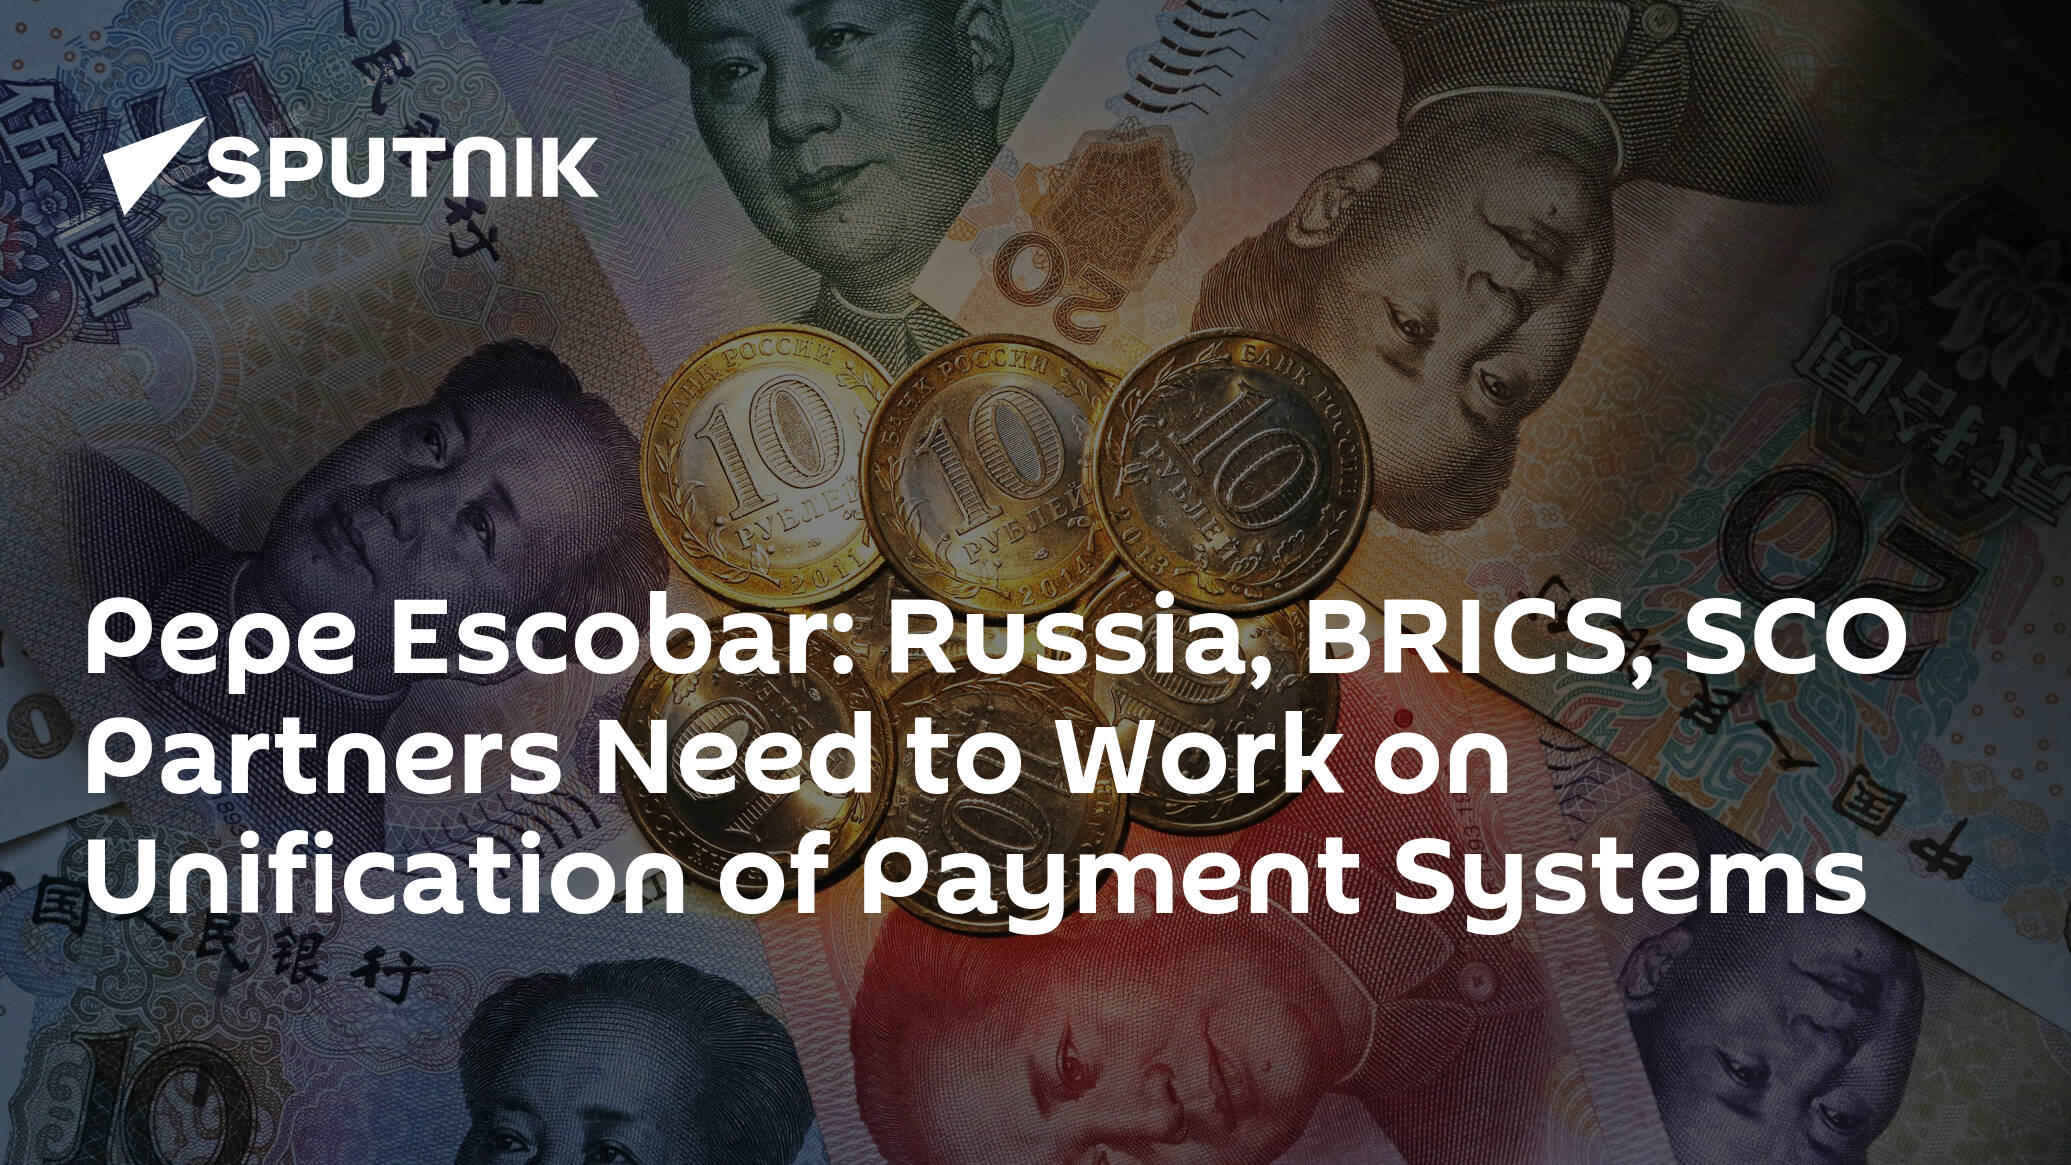 Pepe Escobar: Russia, BRICS, SCO Partners Need to Work on Unification of Payment Systems